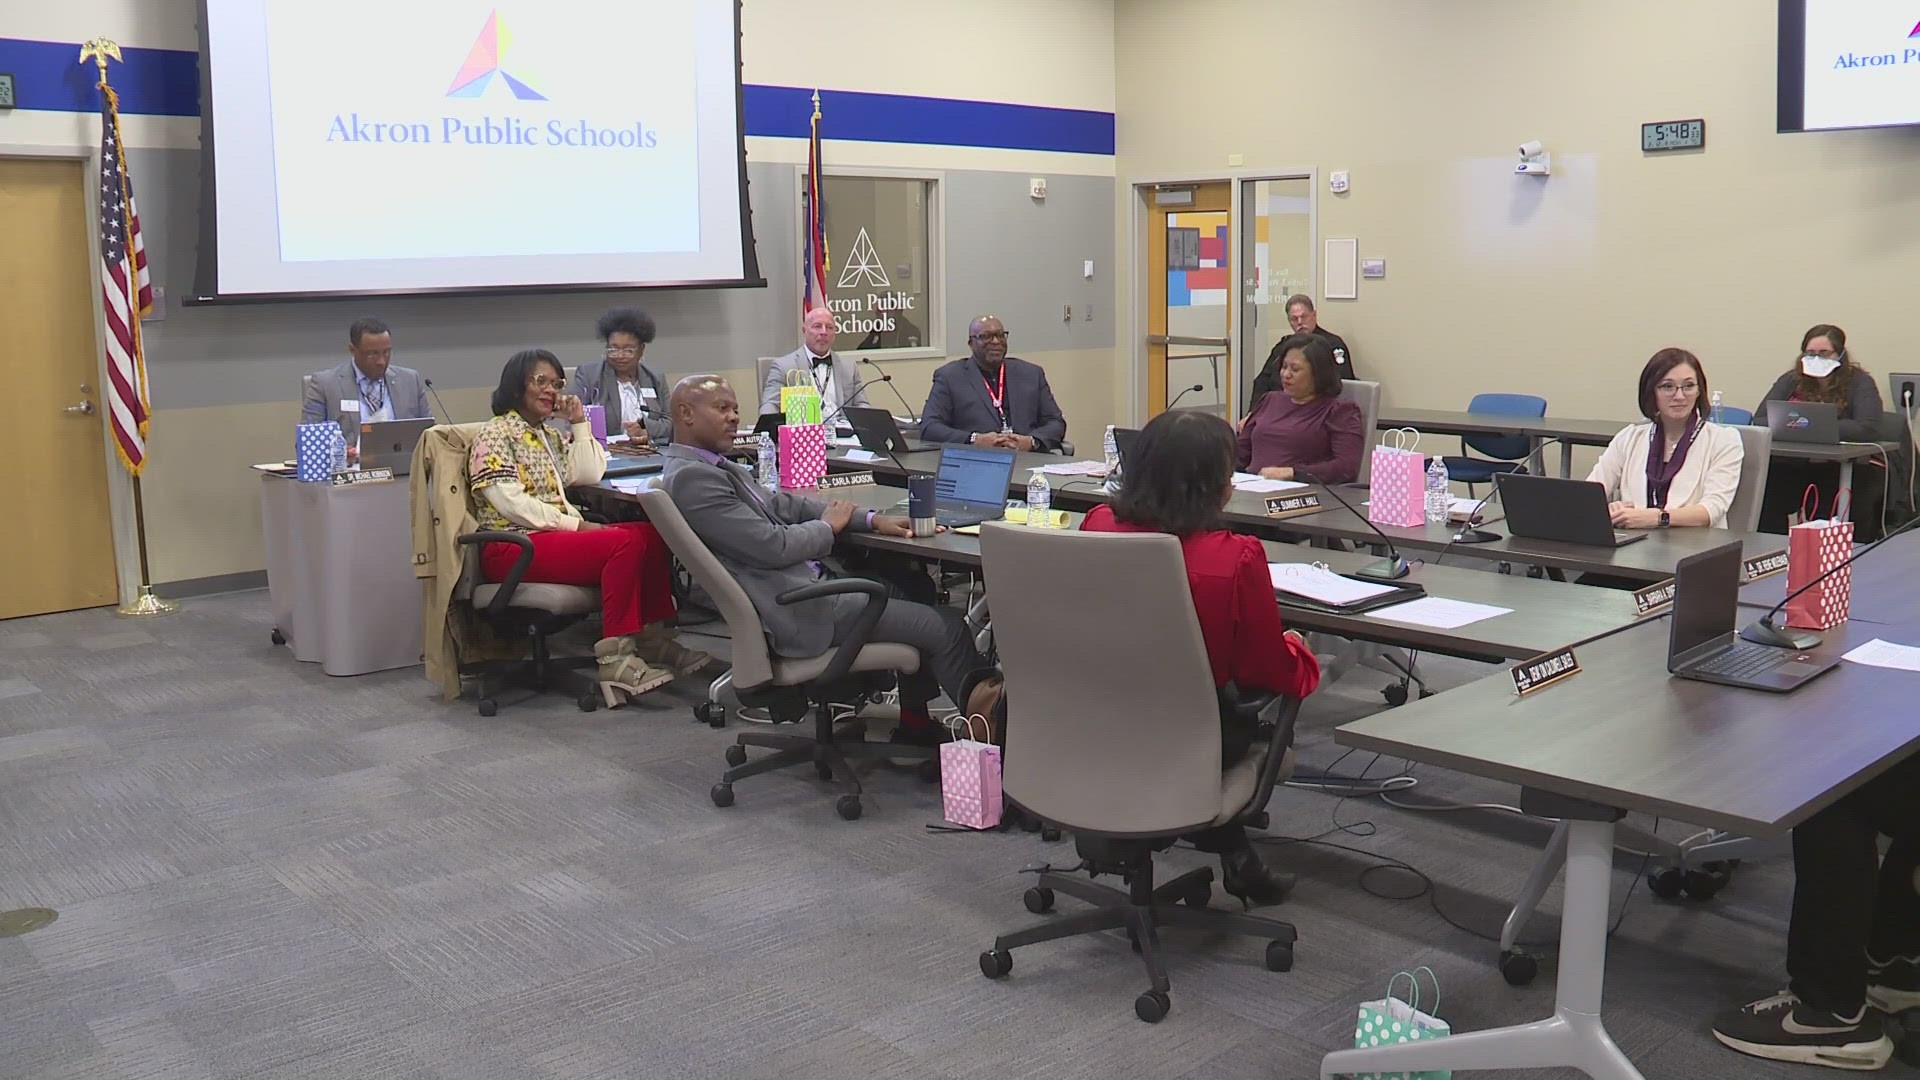 The union claims video from the Jan. 8 Board meeting was illegally edited to cut out board member Rene Molenaur's comments against an outsourced tutoring contract.